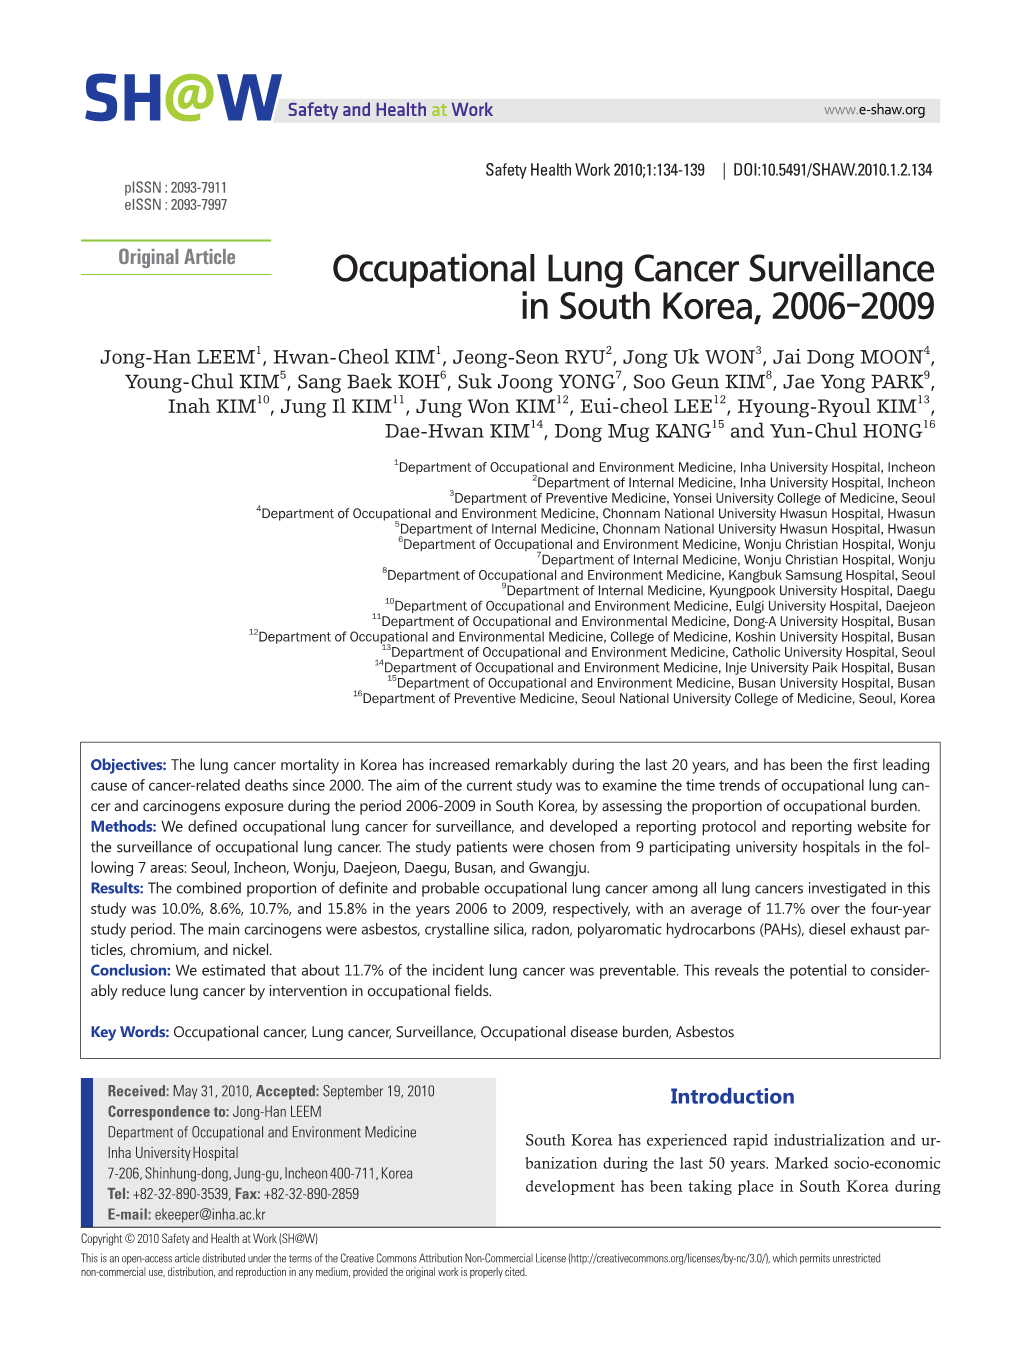 Occupational Lung Cancer Surveillance in South Korea, 2006